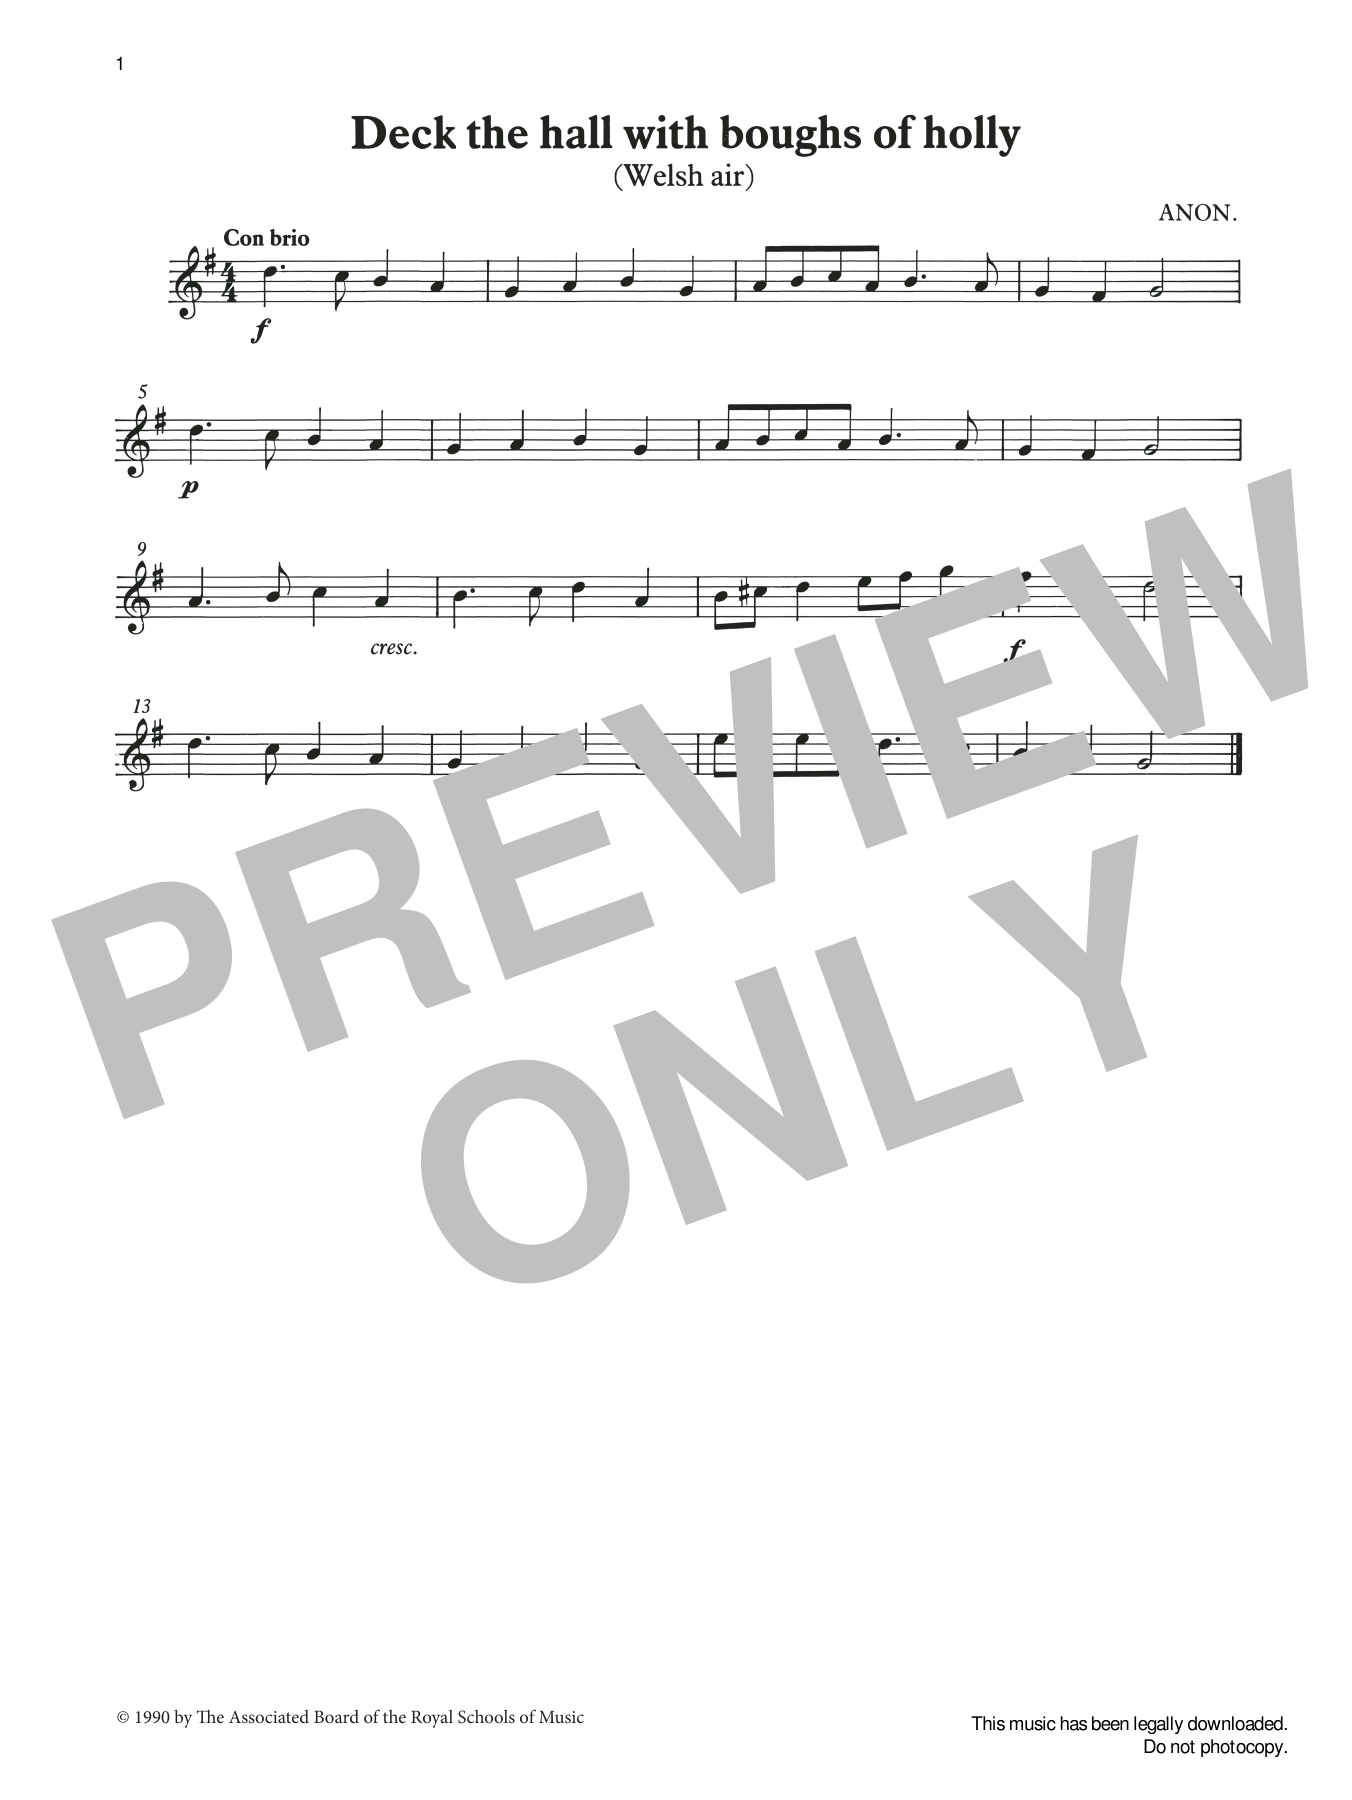 Deck the halls with boughs of holly from Graded Music for Tuned Percussion, Book I (Percussion Solo) von Welsh Air